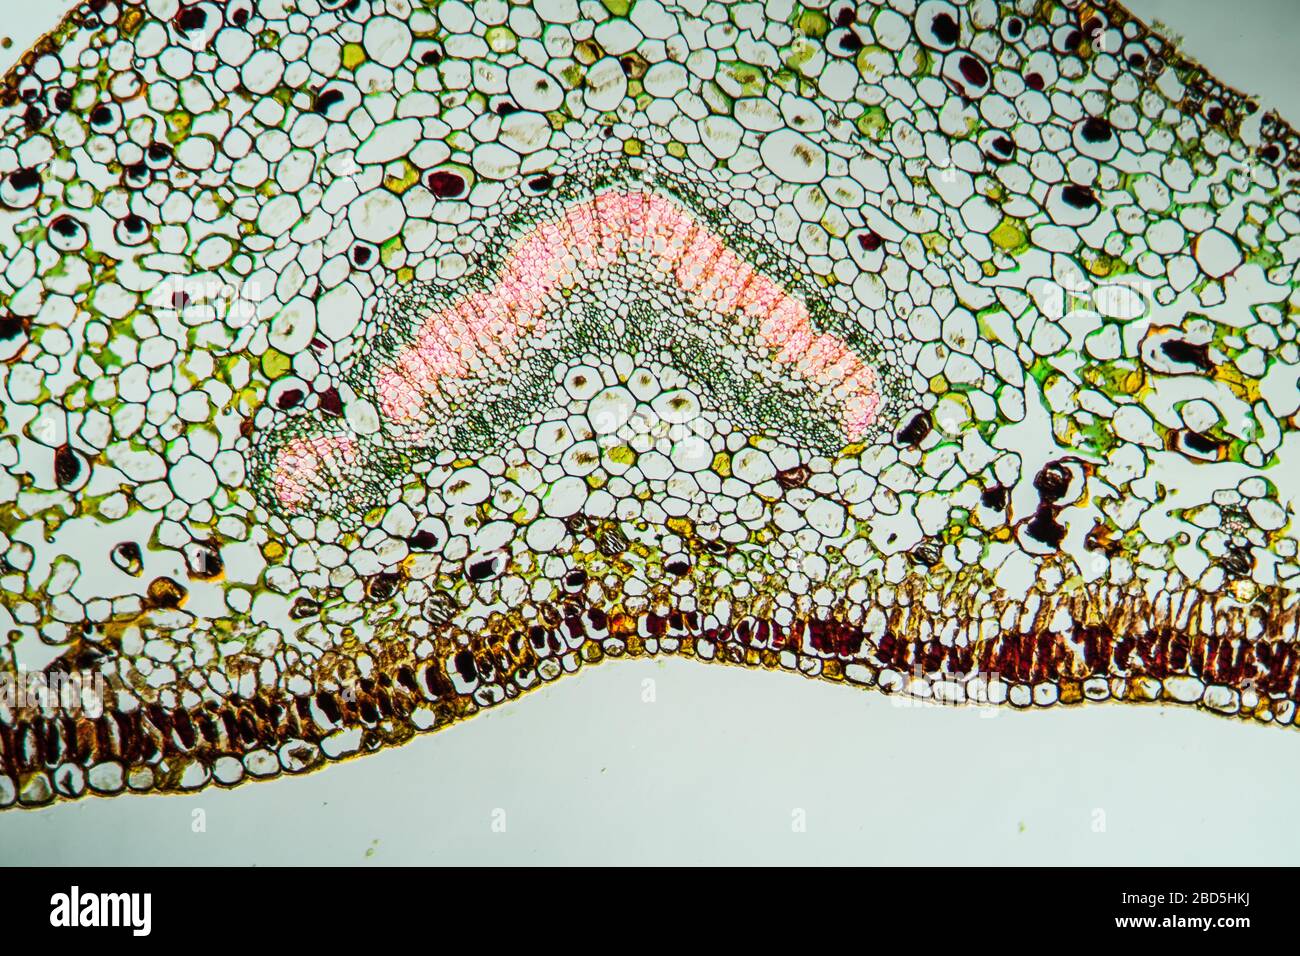 Gentian leaf in cross section 200x Stock Photo